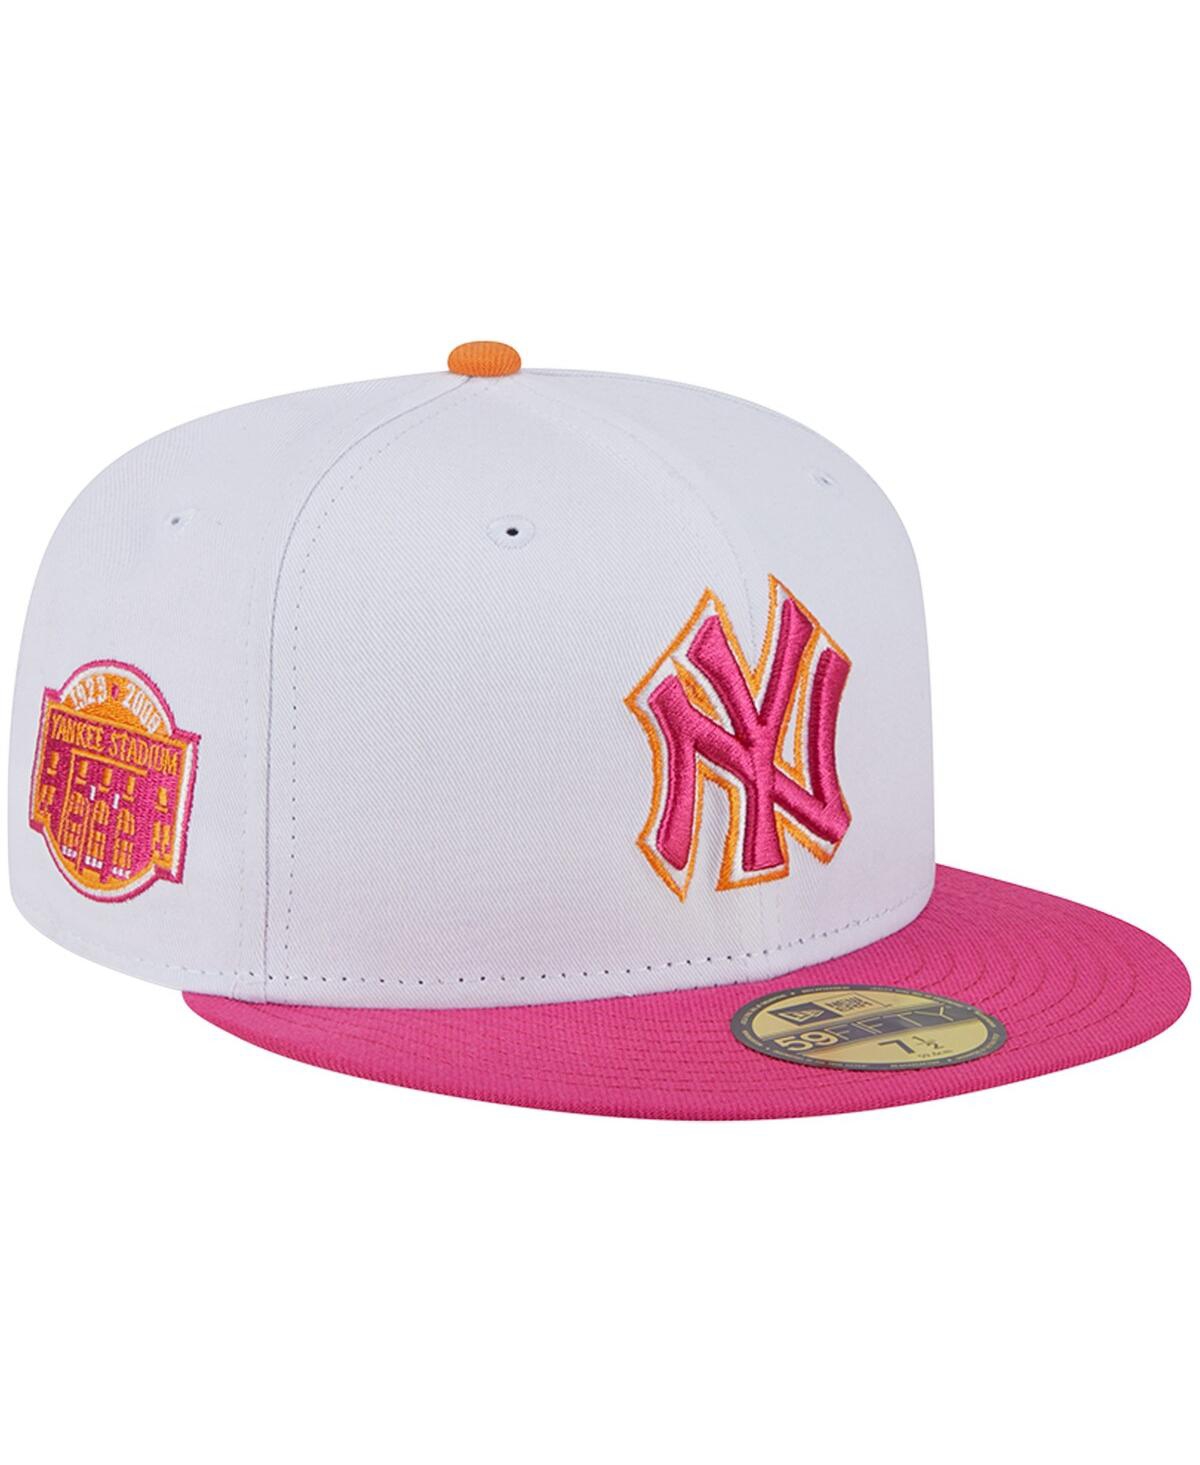 Girls Youth New York Yankees '47 Pink Groovy Clean Up Adjustable Hat